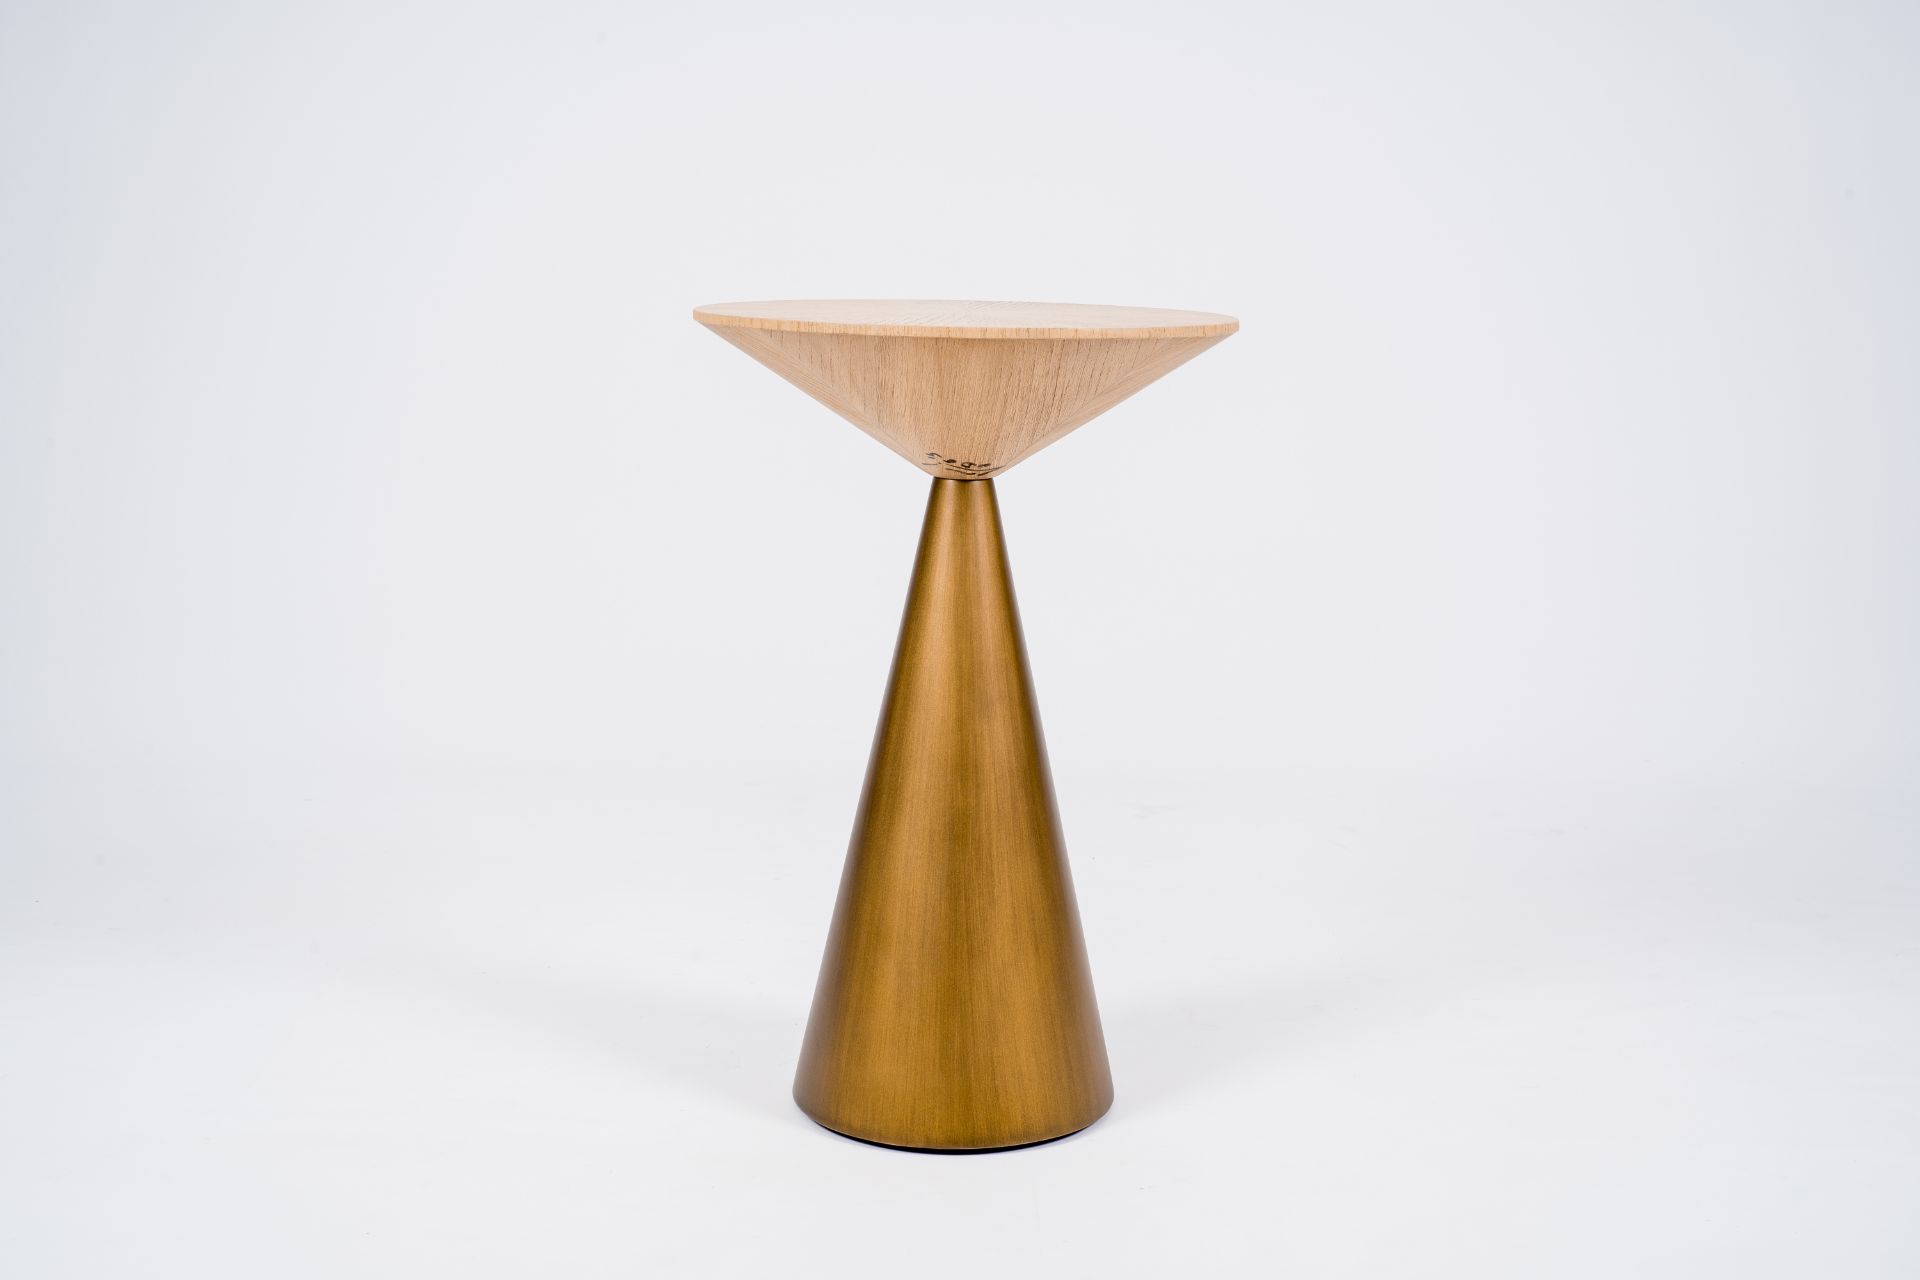 Olivier De Schrijver (1958): A partly gold-coloured solid wood Lily table, ed. 4/60, 21st C. - Image 2 of 9